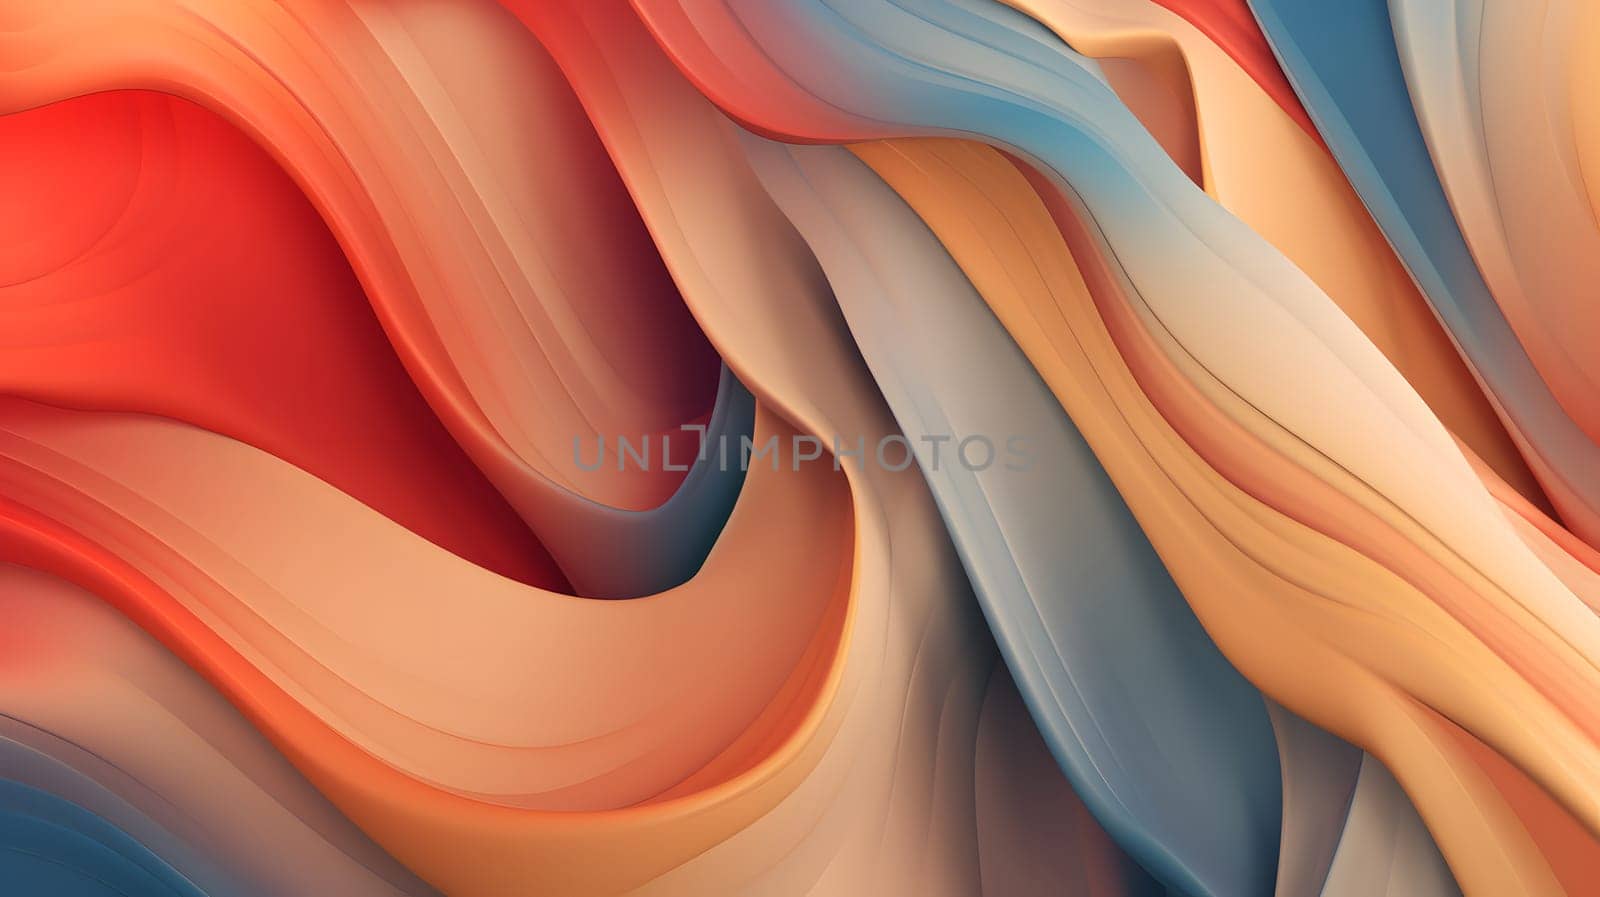 abstract colorful shapeless artistic unobtrusive background and wallpaper, neural network generated image by z1b